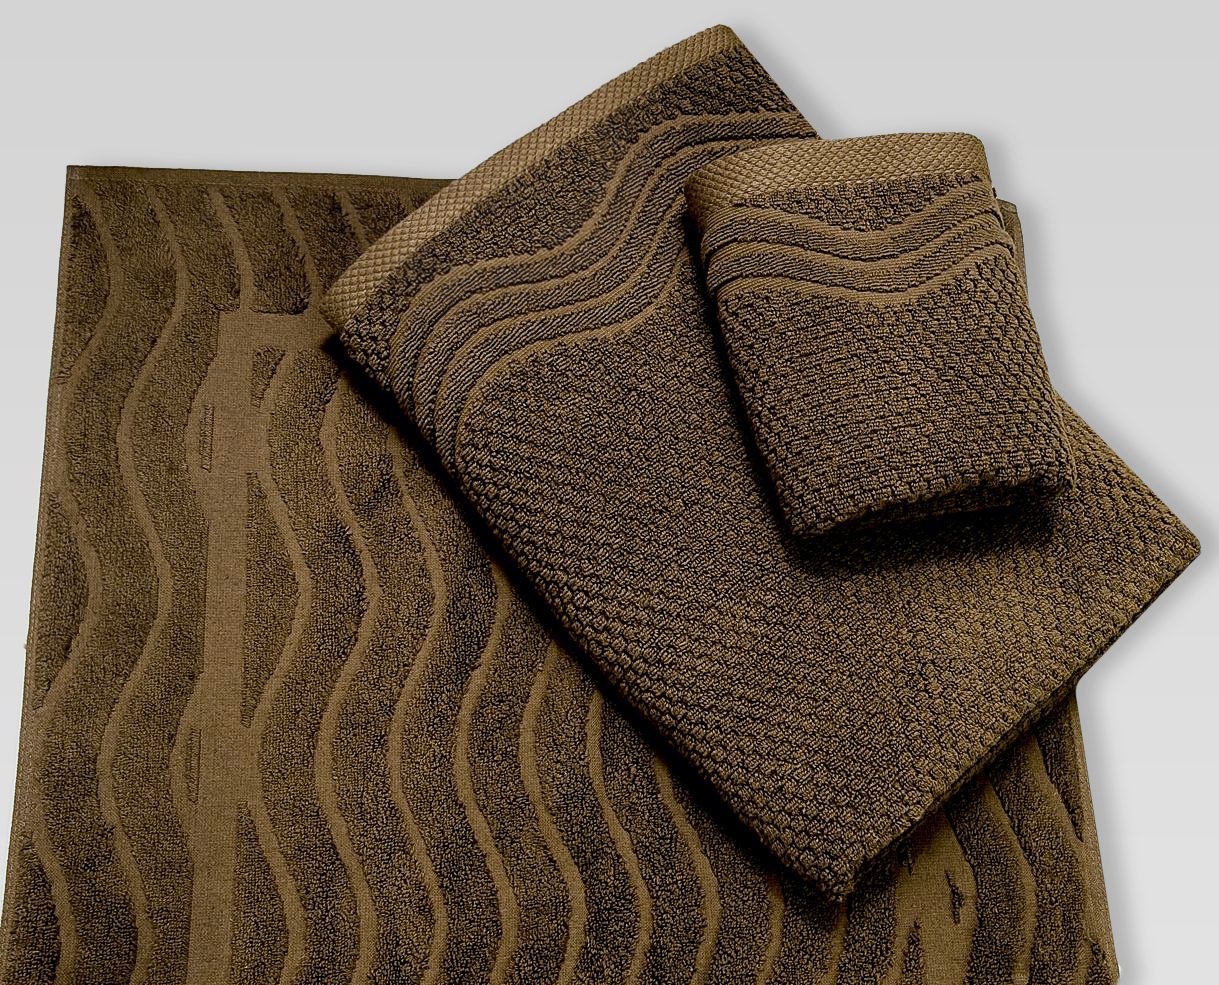 Aversa Collection Room Towels by Poggesi - Luxurious and absorbent towels for an elevated experience.